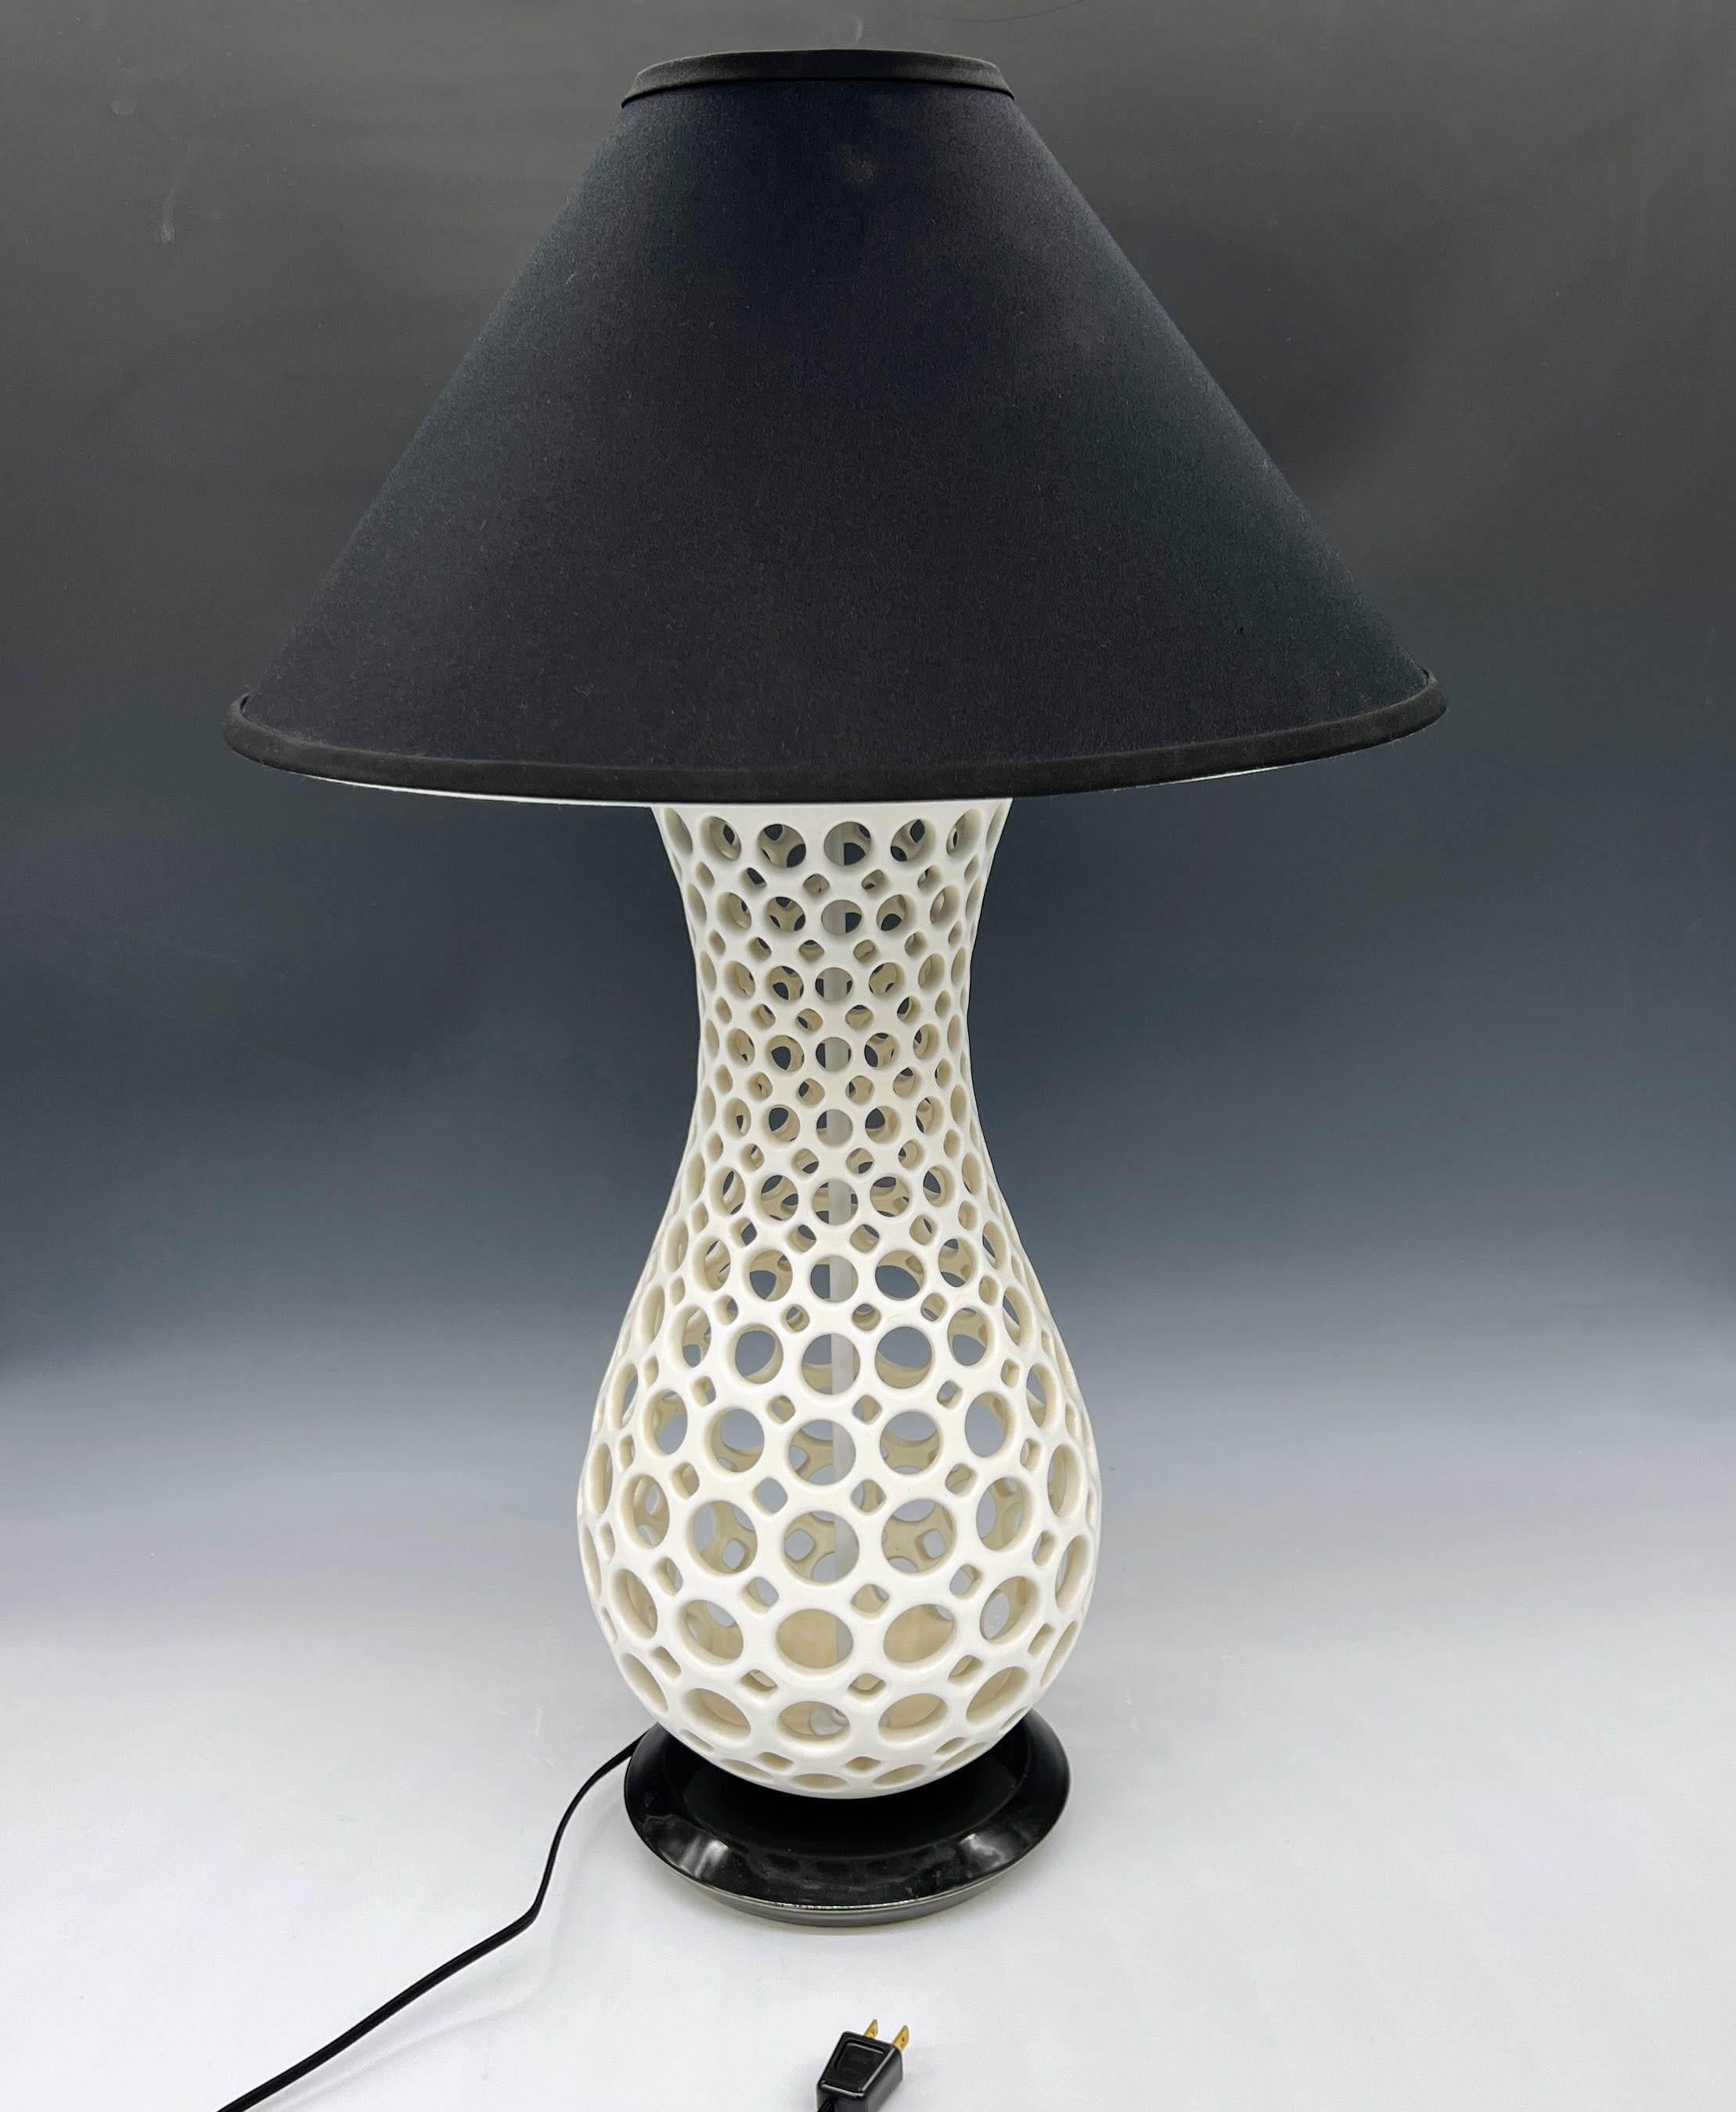 This lamp is wheel thrown and hand pierced with a white satin glaze.
The base is wheel thrown ceramic with a glassy black glaze
Black cord and switch.
Can be used with any wattage bulb.